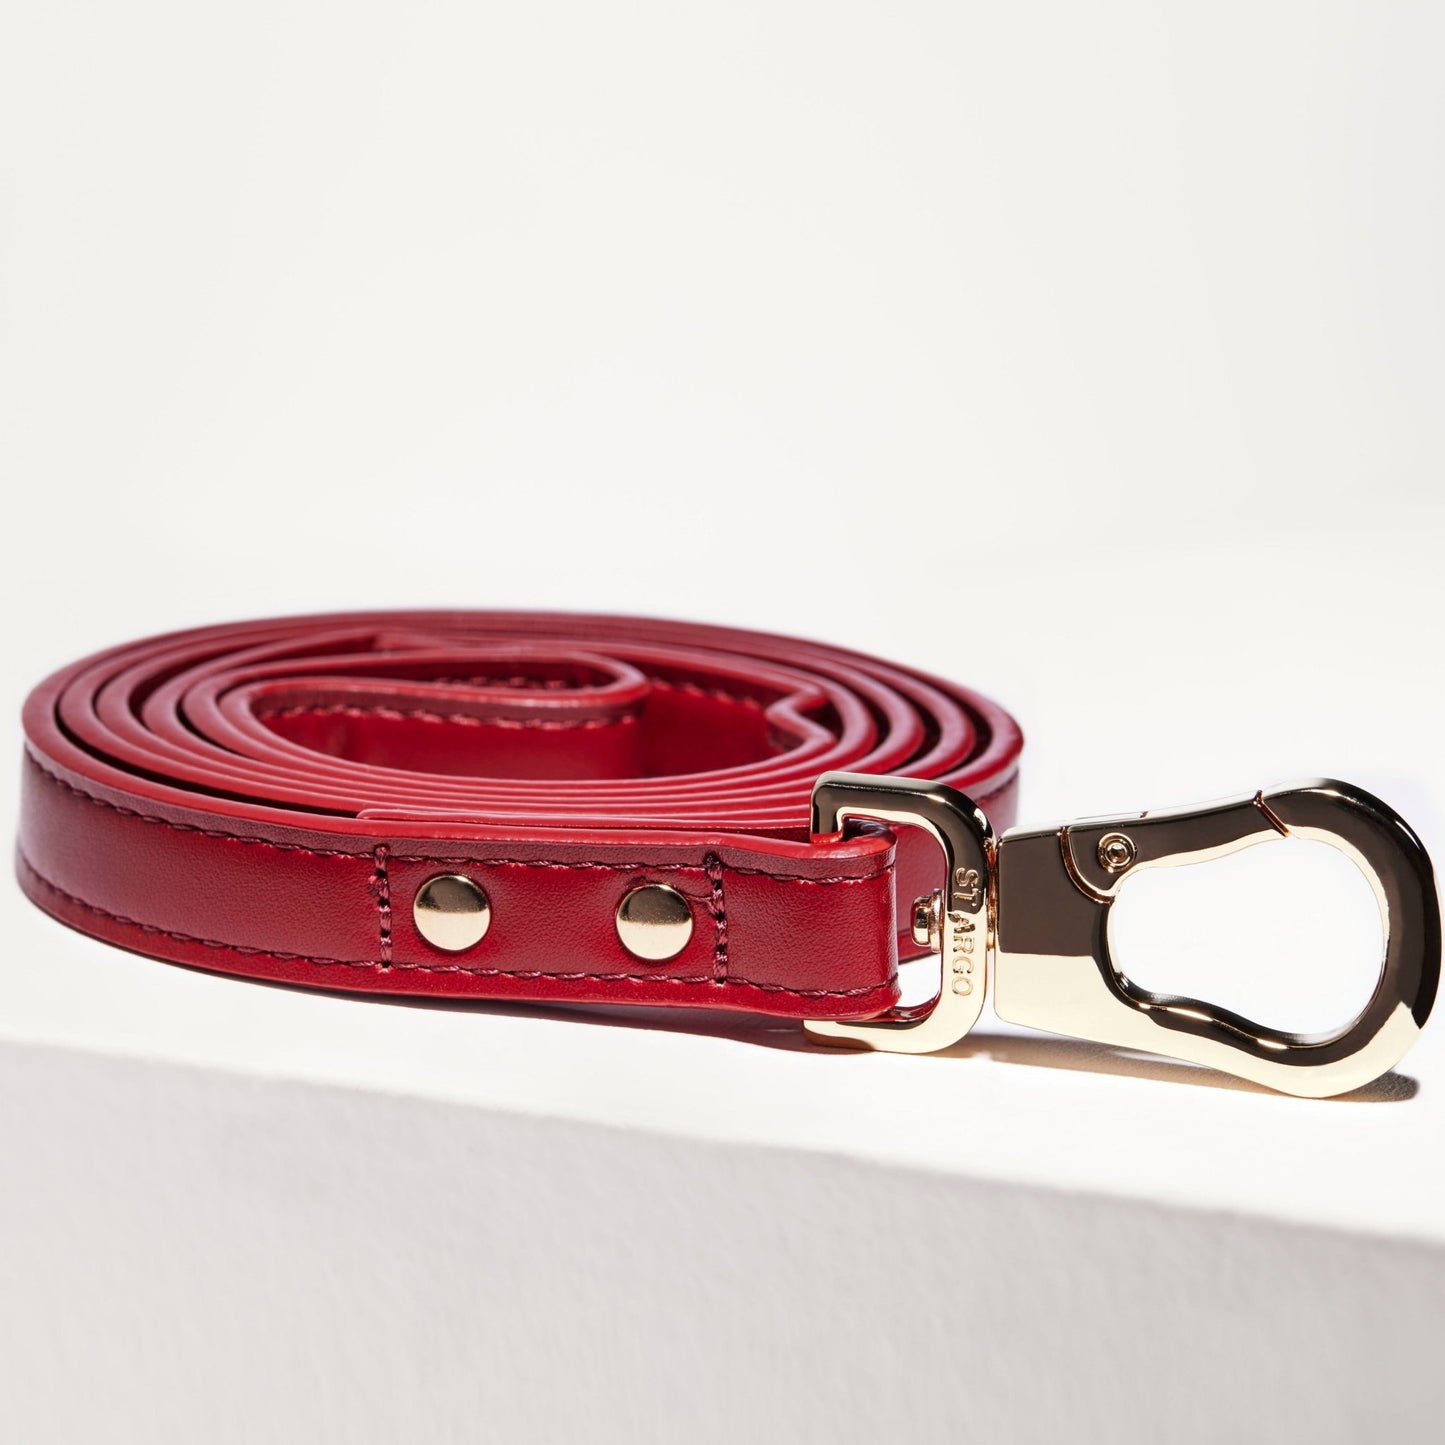 Ruby red vegan leather dog lead with gold hardware